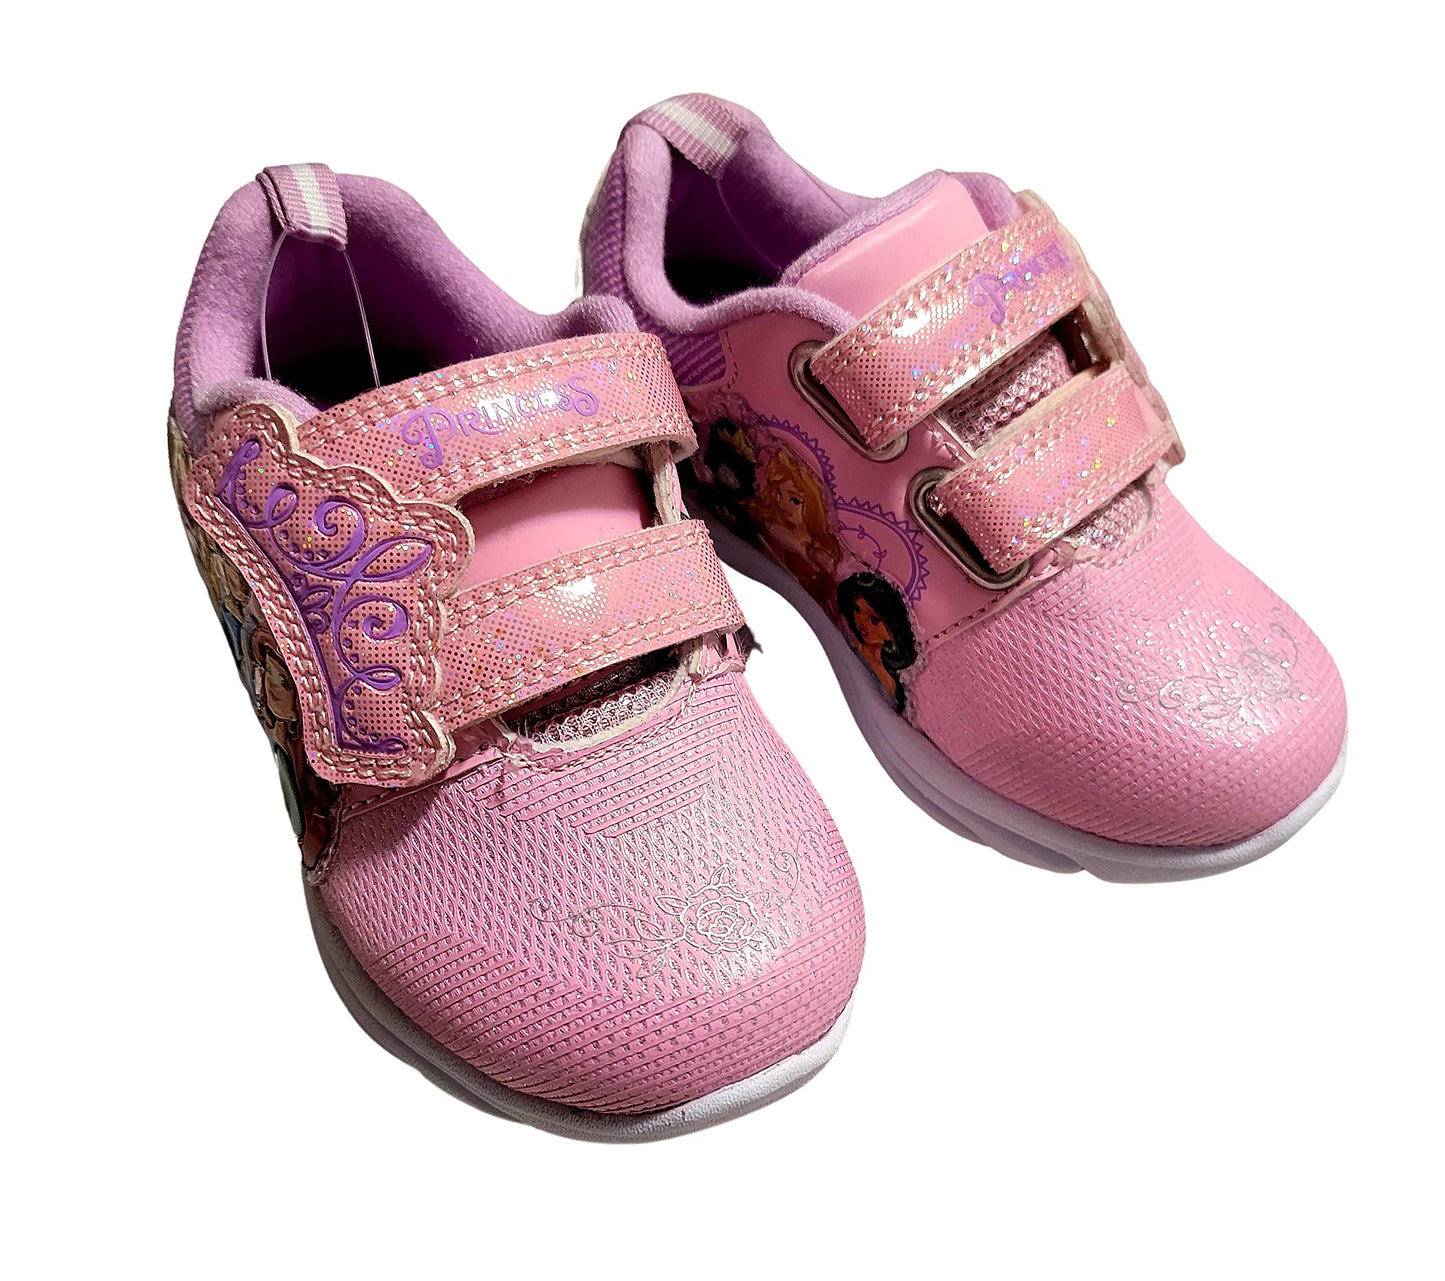 Disney Princess Girl's Lighted Athletic Sneaker, Lilac/Pink (Toddler/Little Kid)